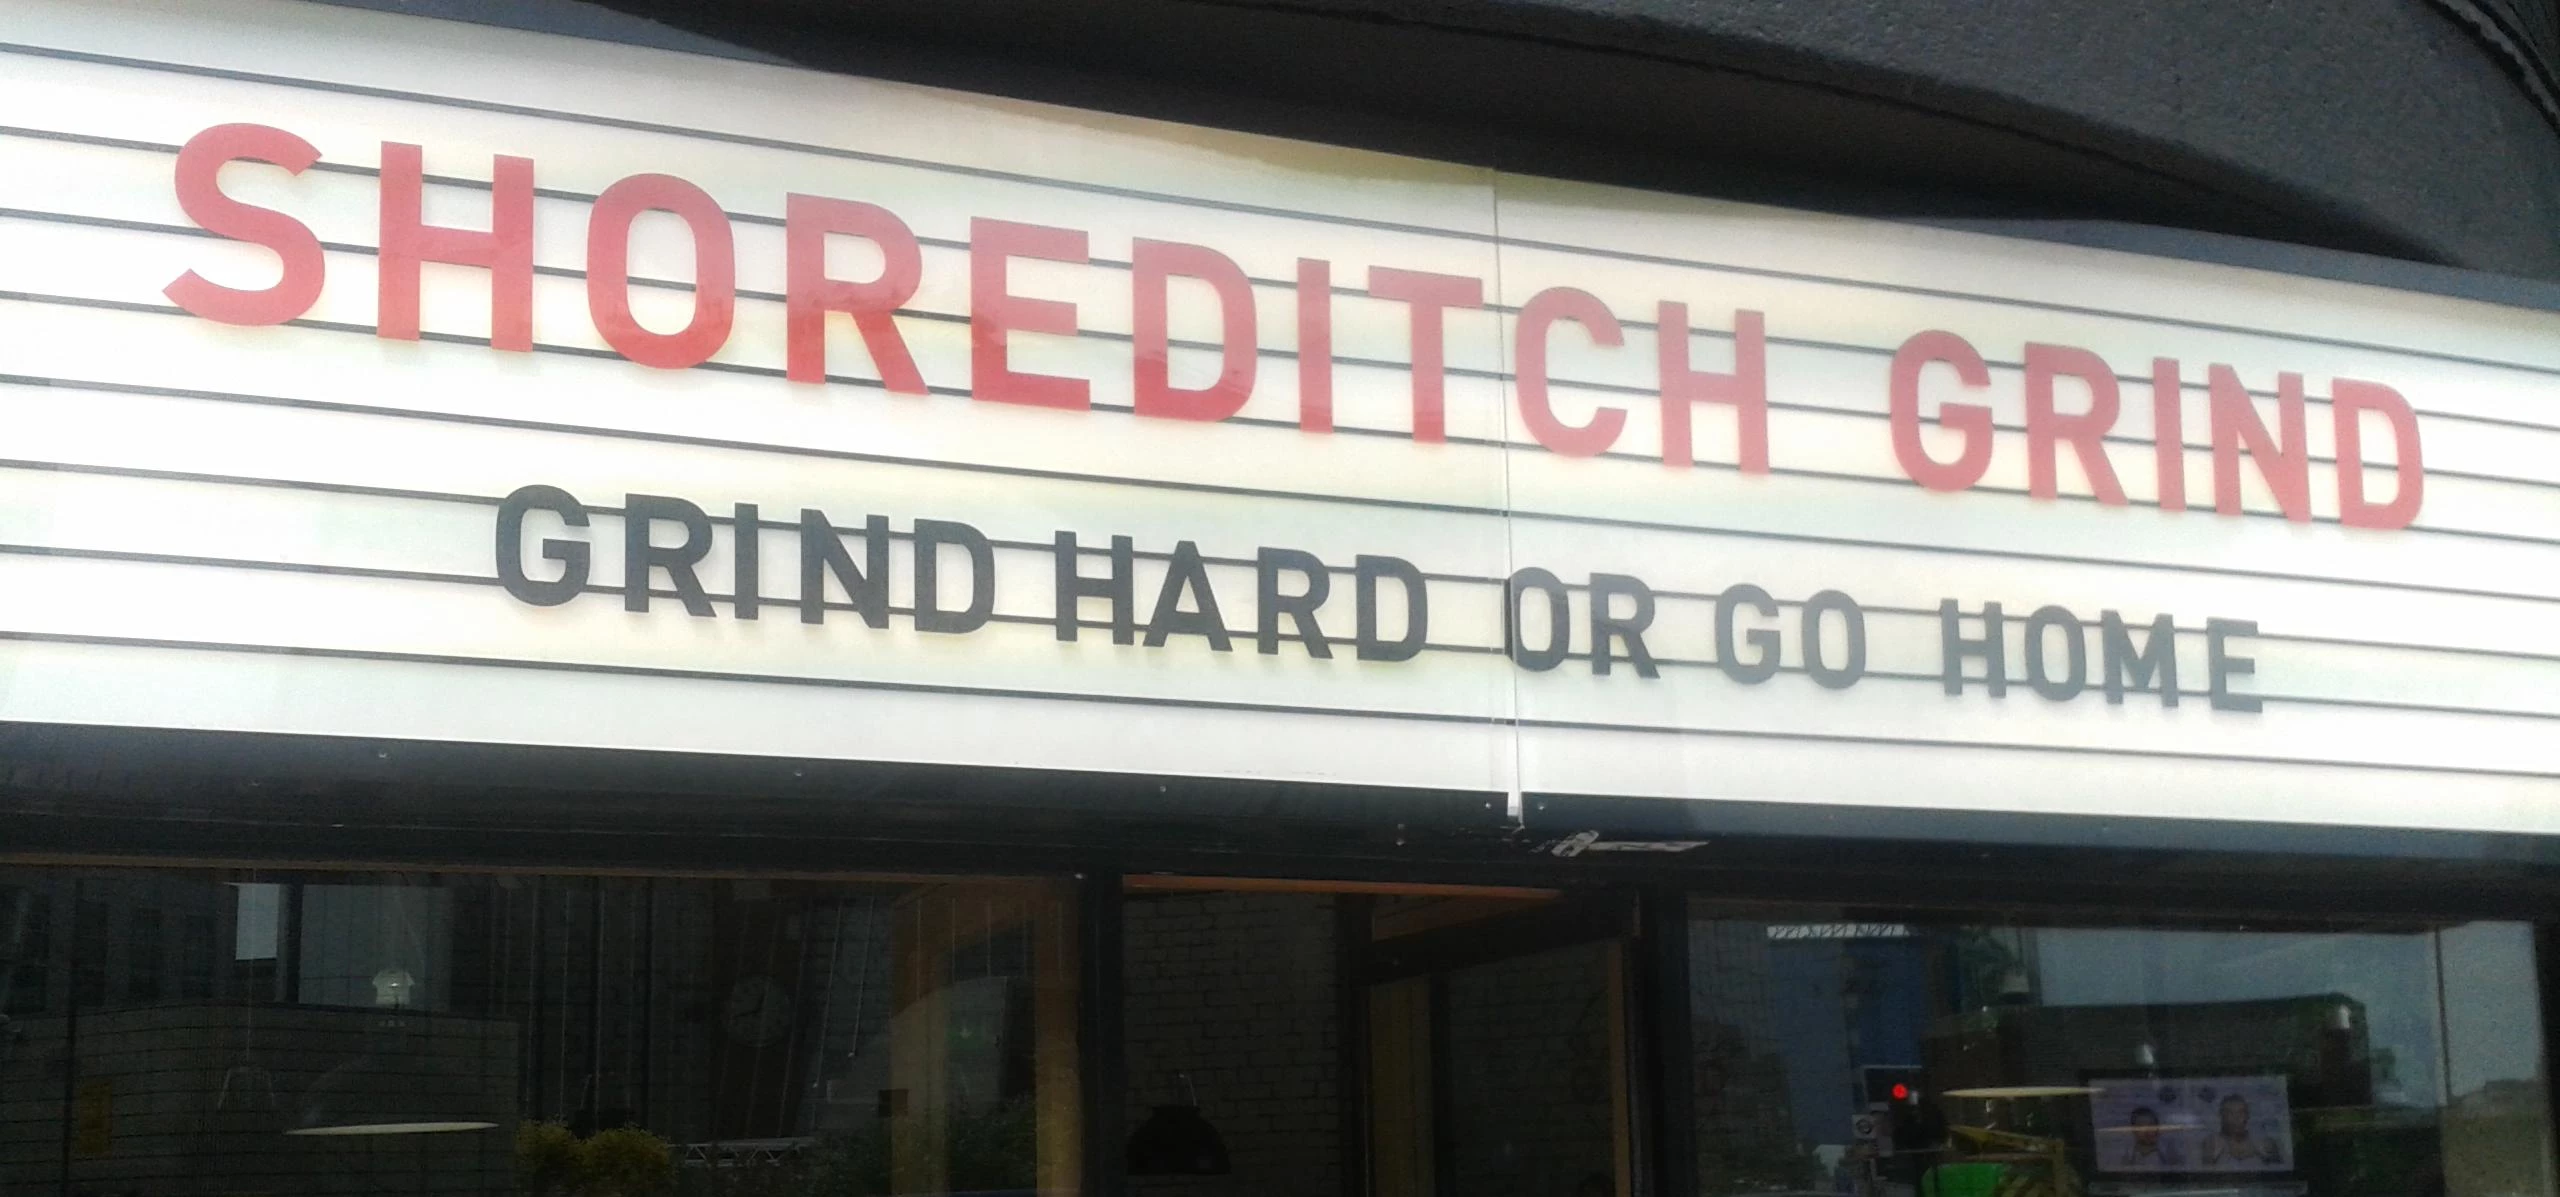 @ShoreditchGrind “Grind Hard or Go Home”, Silicon Roundabout